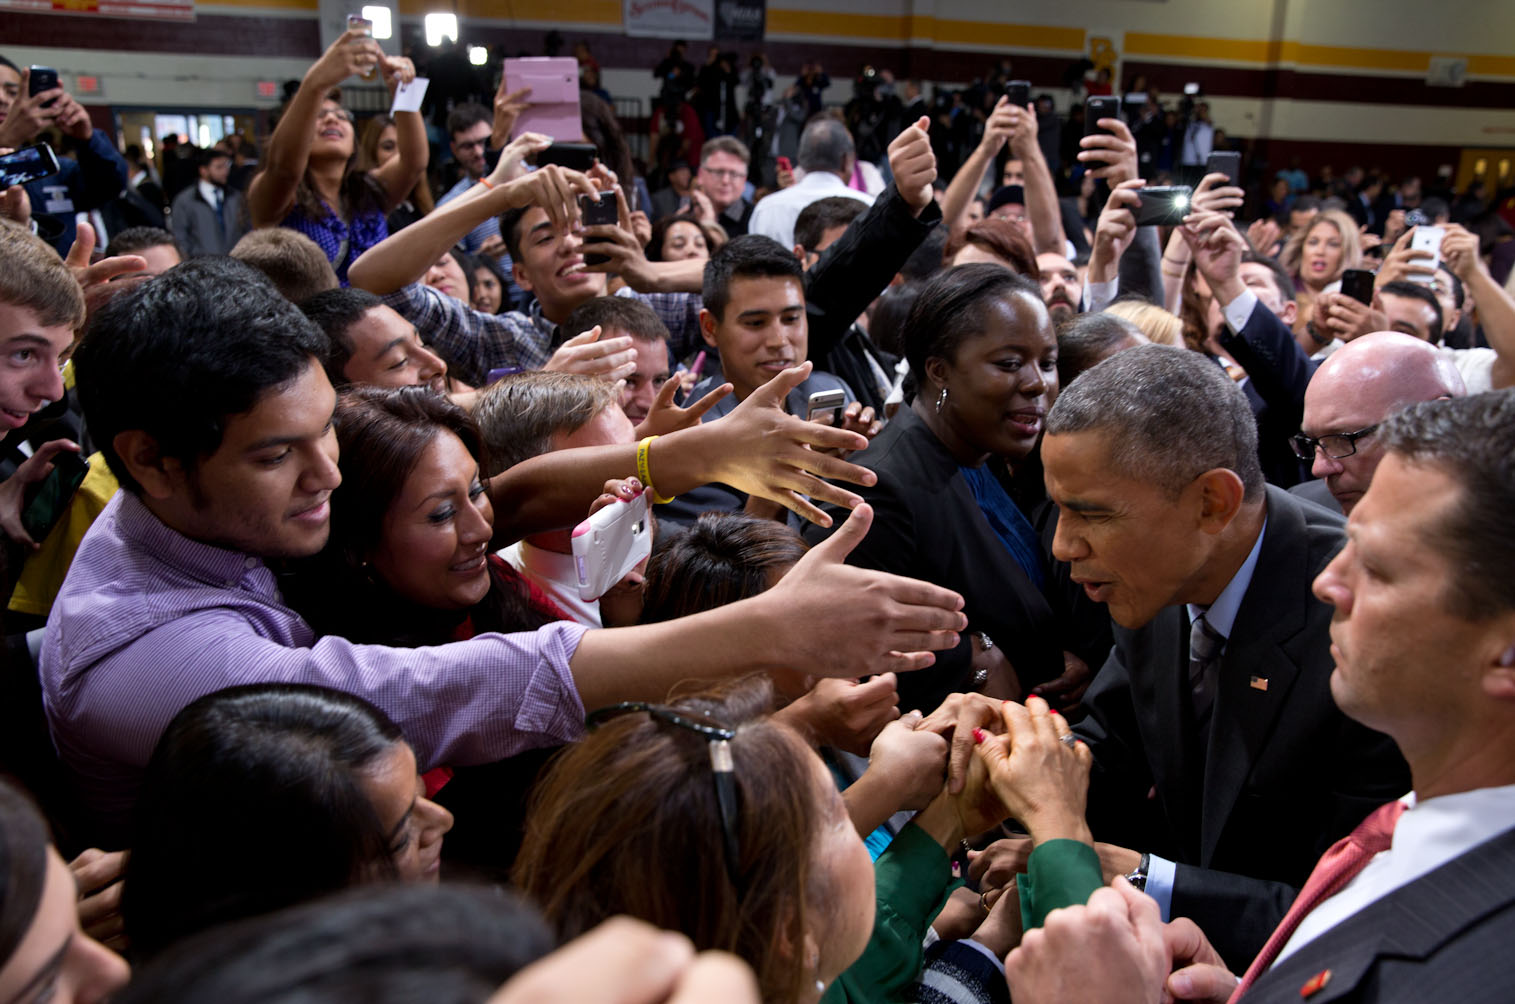 President Obama greets audience members after making remarks on immigration at Del Sol High School in Las Vegas, Nov. 21, 2014